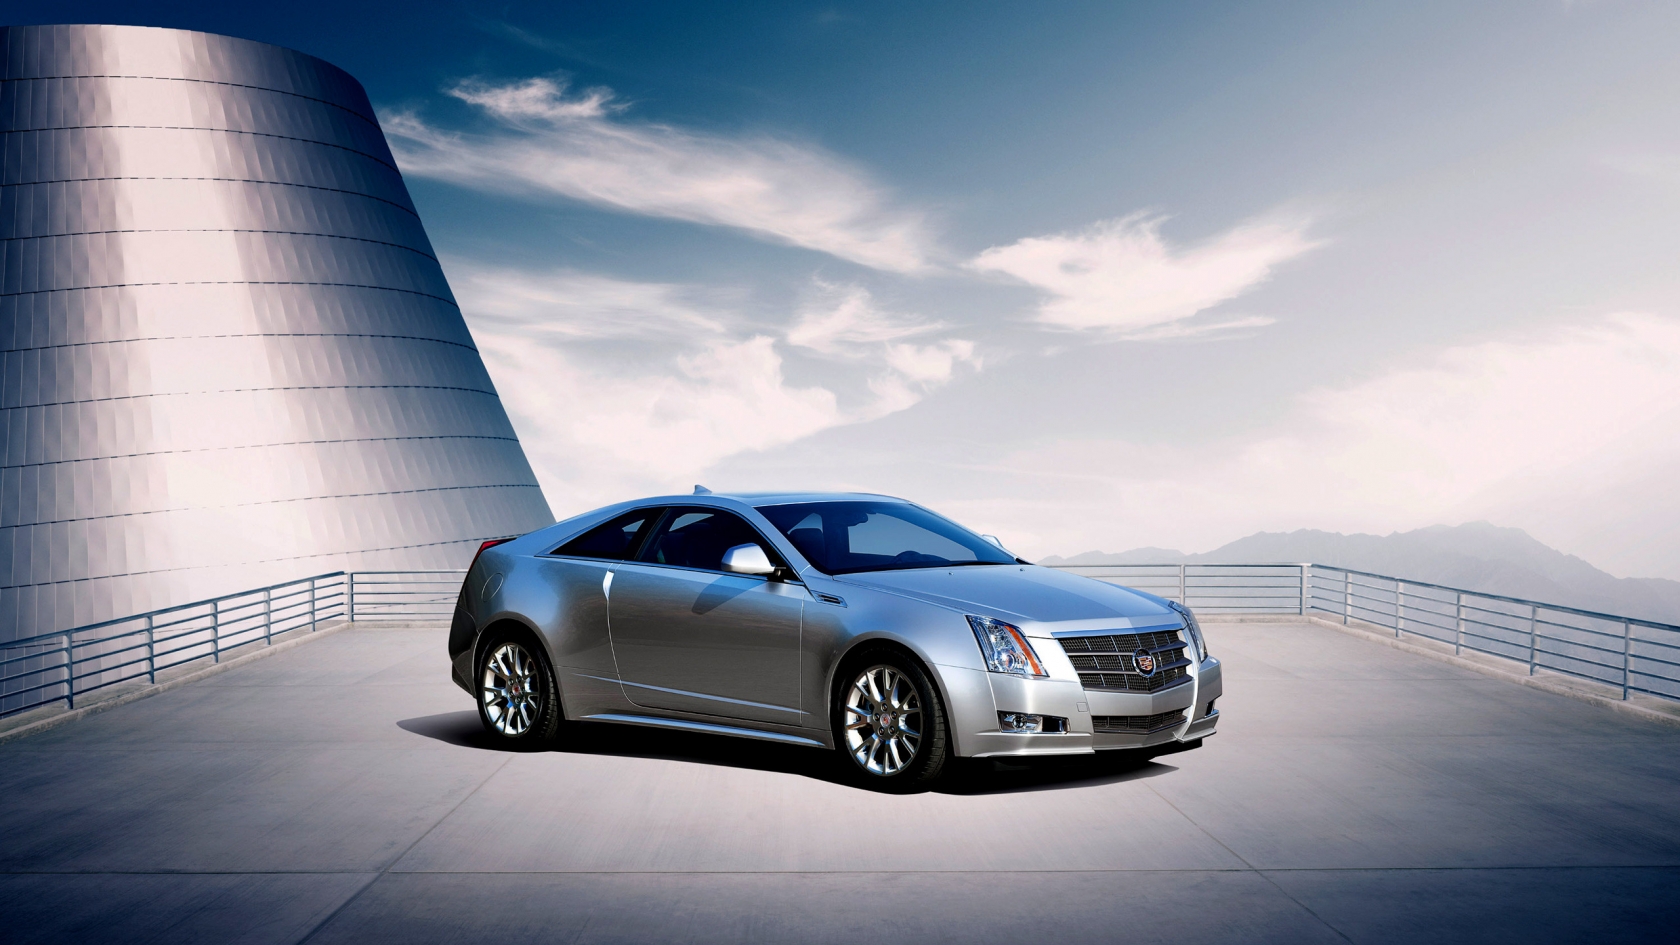 2011 Cadillac CTS Coupe for 1680 x 945 HDTV resolution